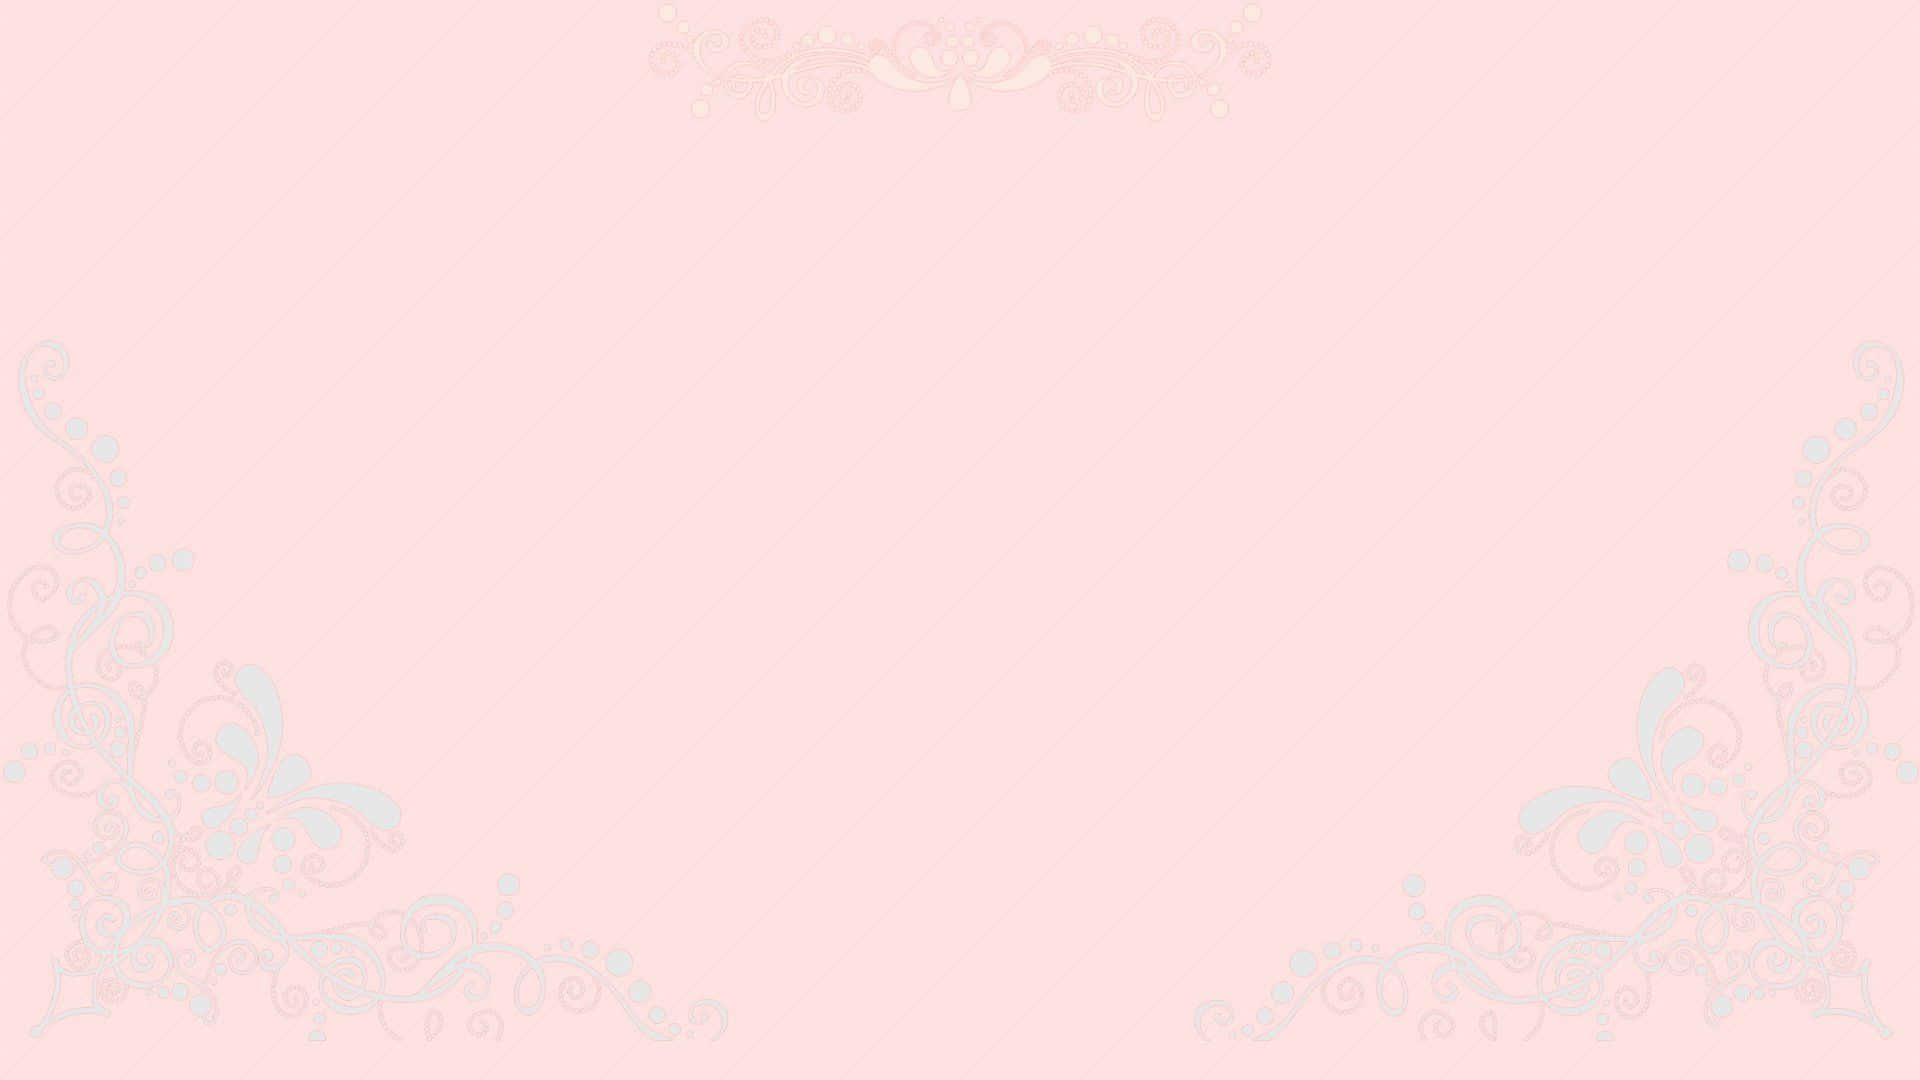 A refreshingly soft and cheerful pastel background